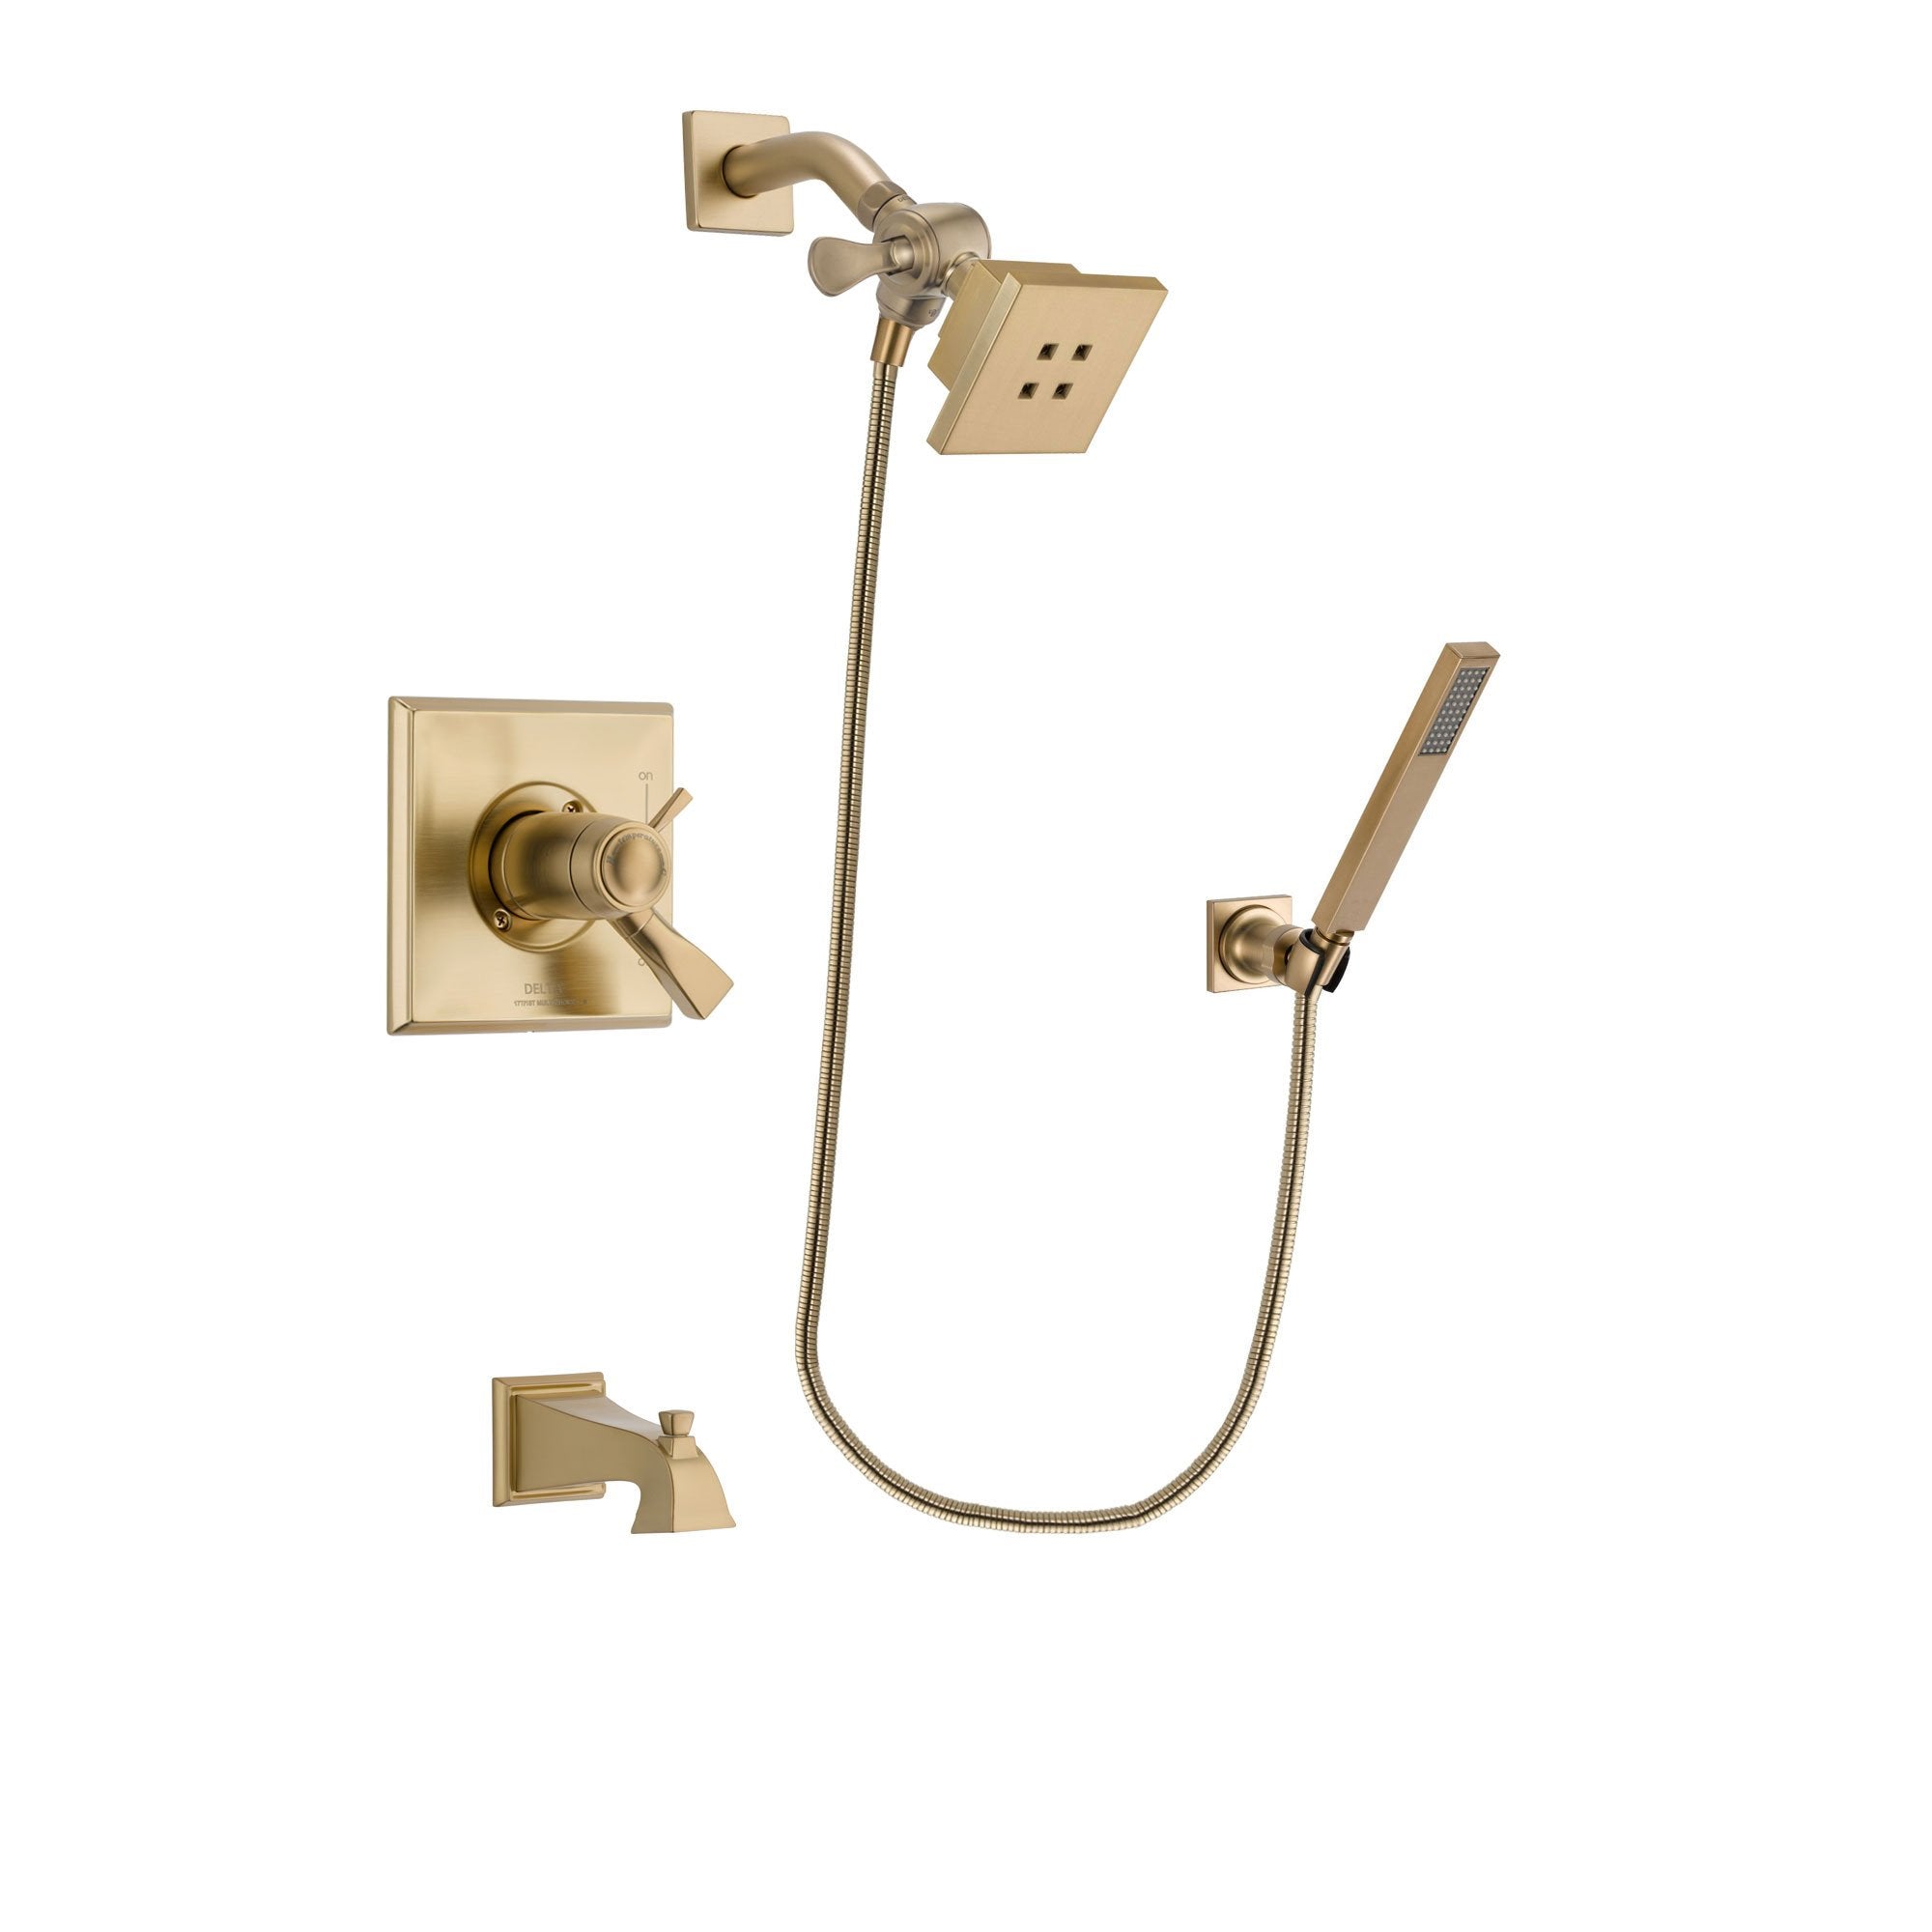 Delta Dryden Champagne Bronze Finish Thermostatic Tub and Shower Faucet System Package with Square Showerhead and Modern Wall-Mount Handheld Shower Stick Includes Rough-in Valve and Tub Spout DSP3873V